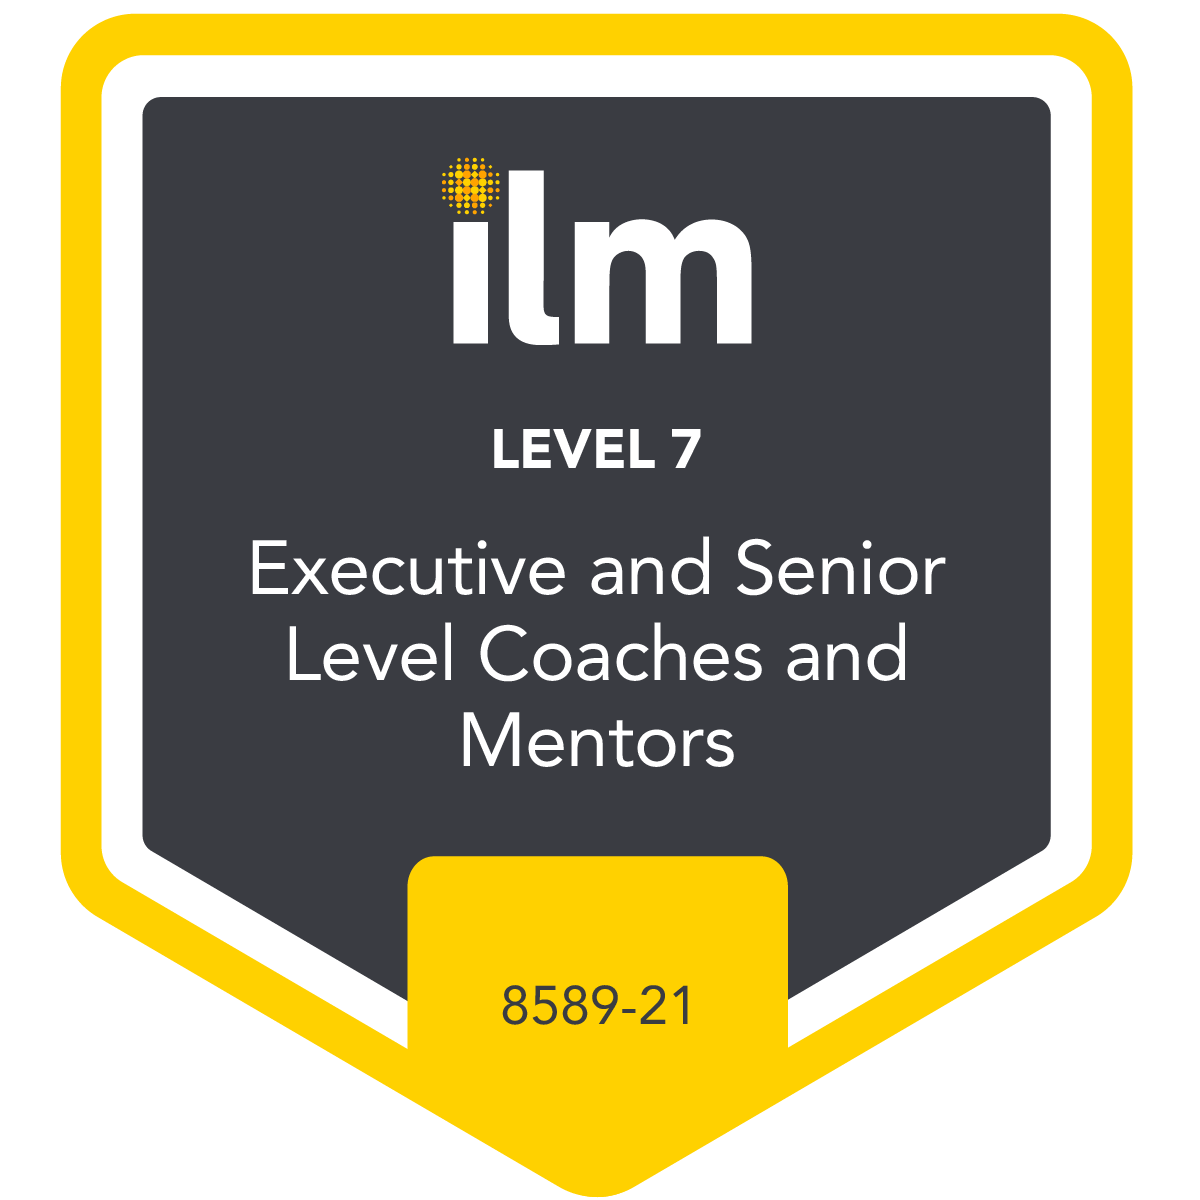 ilm logo level 7 for Executive and senior level coaches and mentors